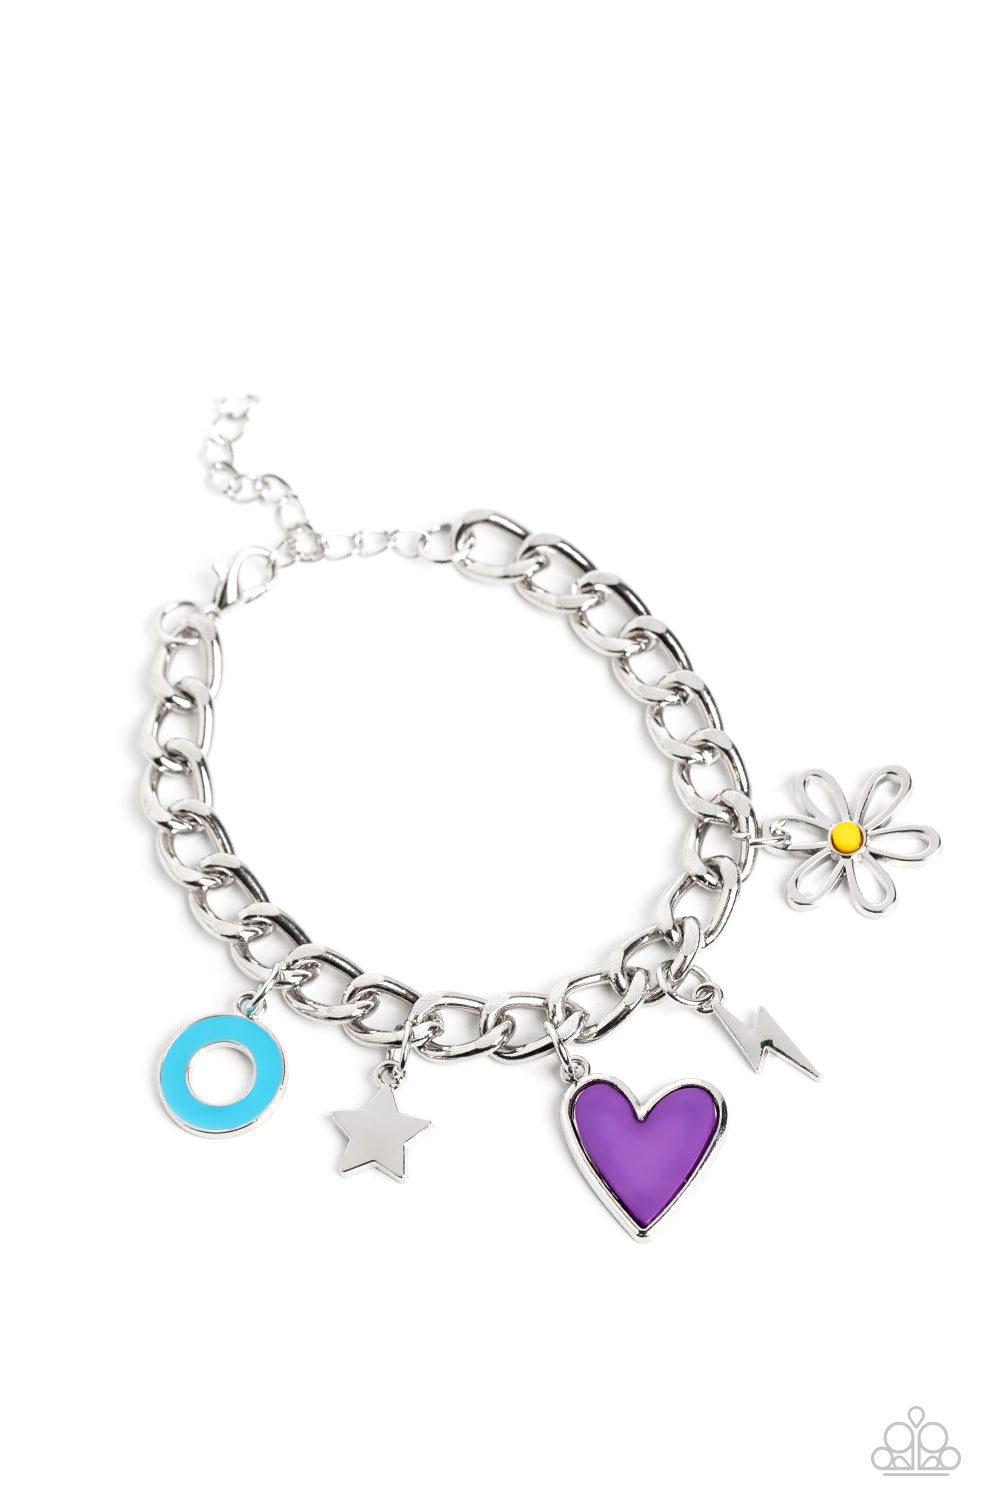 Elongated silver chain links, separated by tiny silver beads, lead down the neckline to a section of thick, flat, silver curb chain. A collection of whimsical charms gather along the thicker chain, including a lightning bolt, a star, a blue ring, a silhouette of a flower, a vibrant pink bead, a purple heart, and a polished white baroque pearl. 